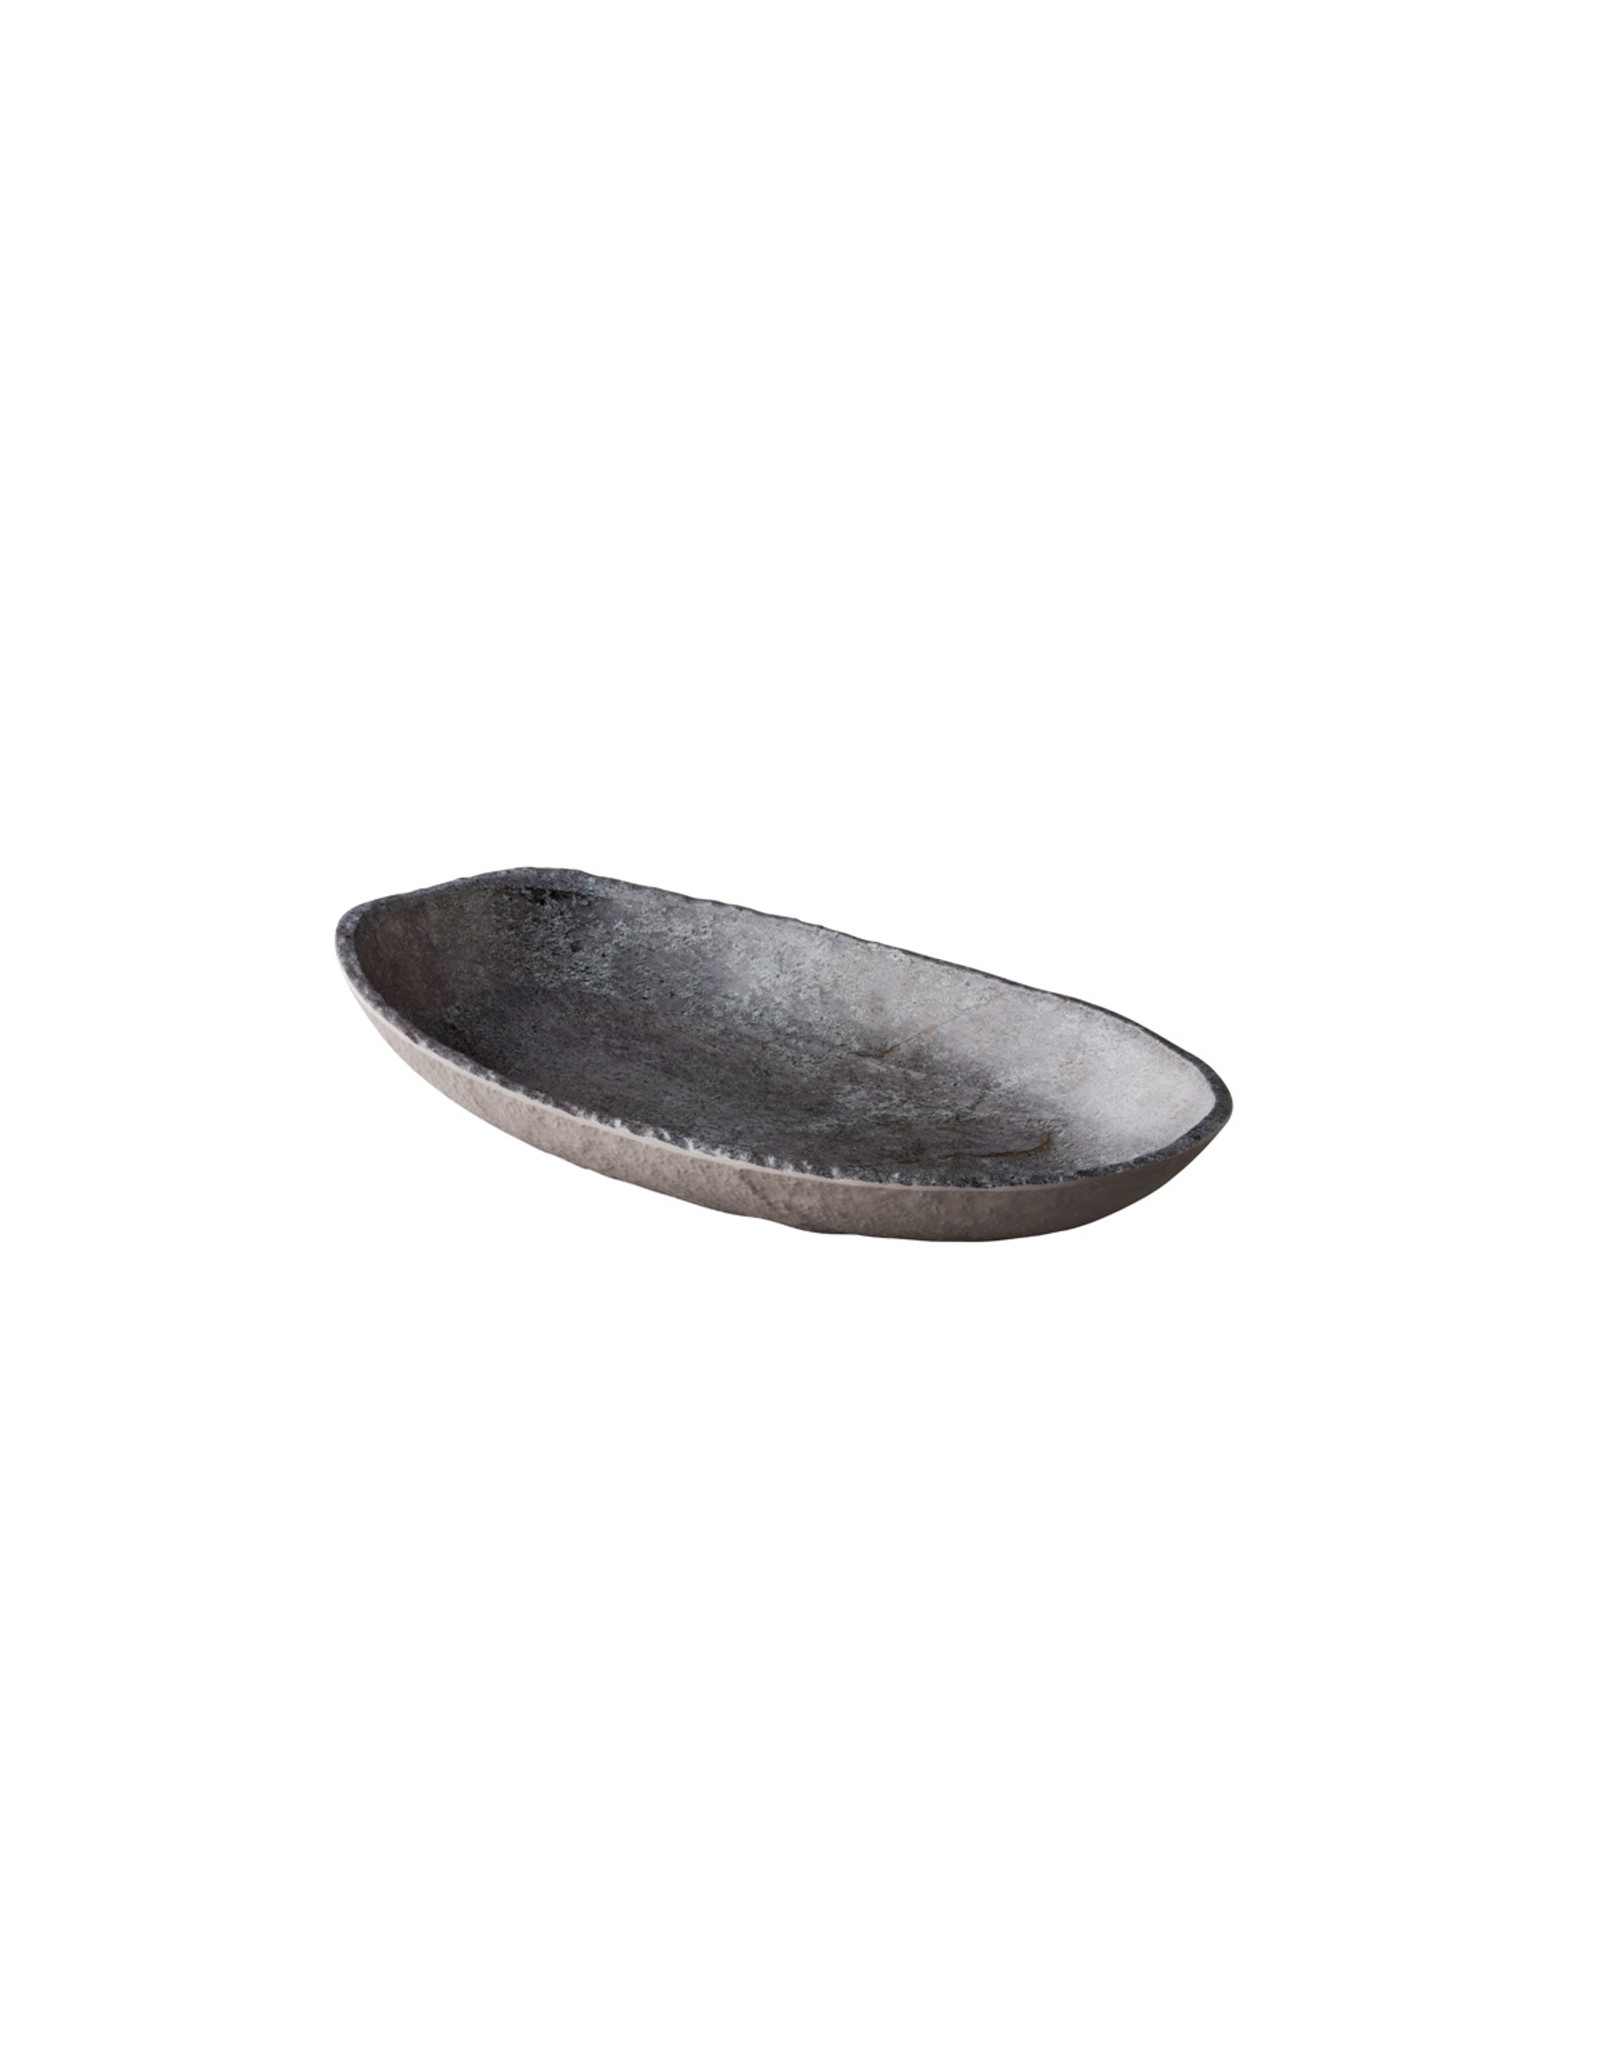 Stylepoint Cosmos dish oval 43 x 24 x 7,5 cm